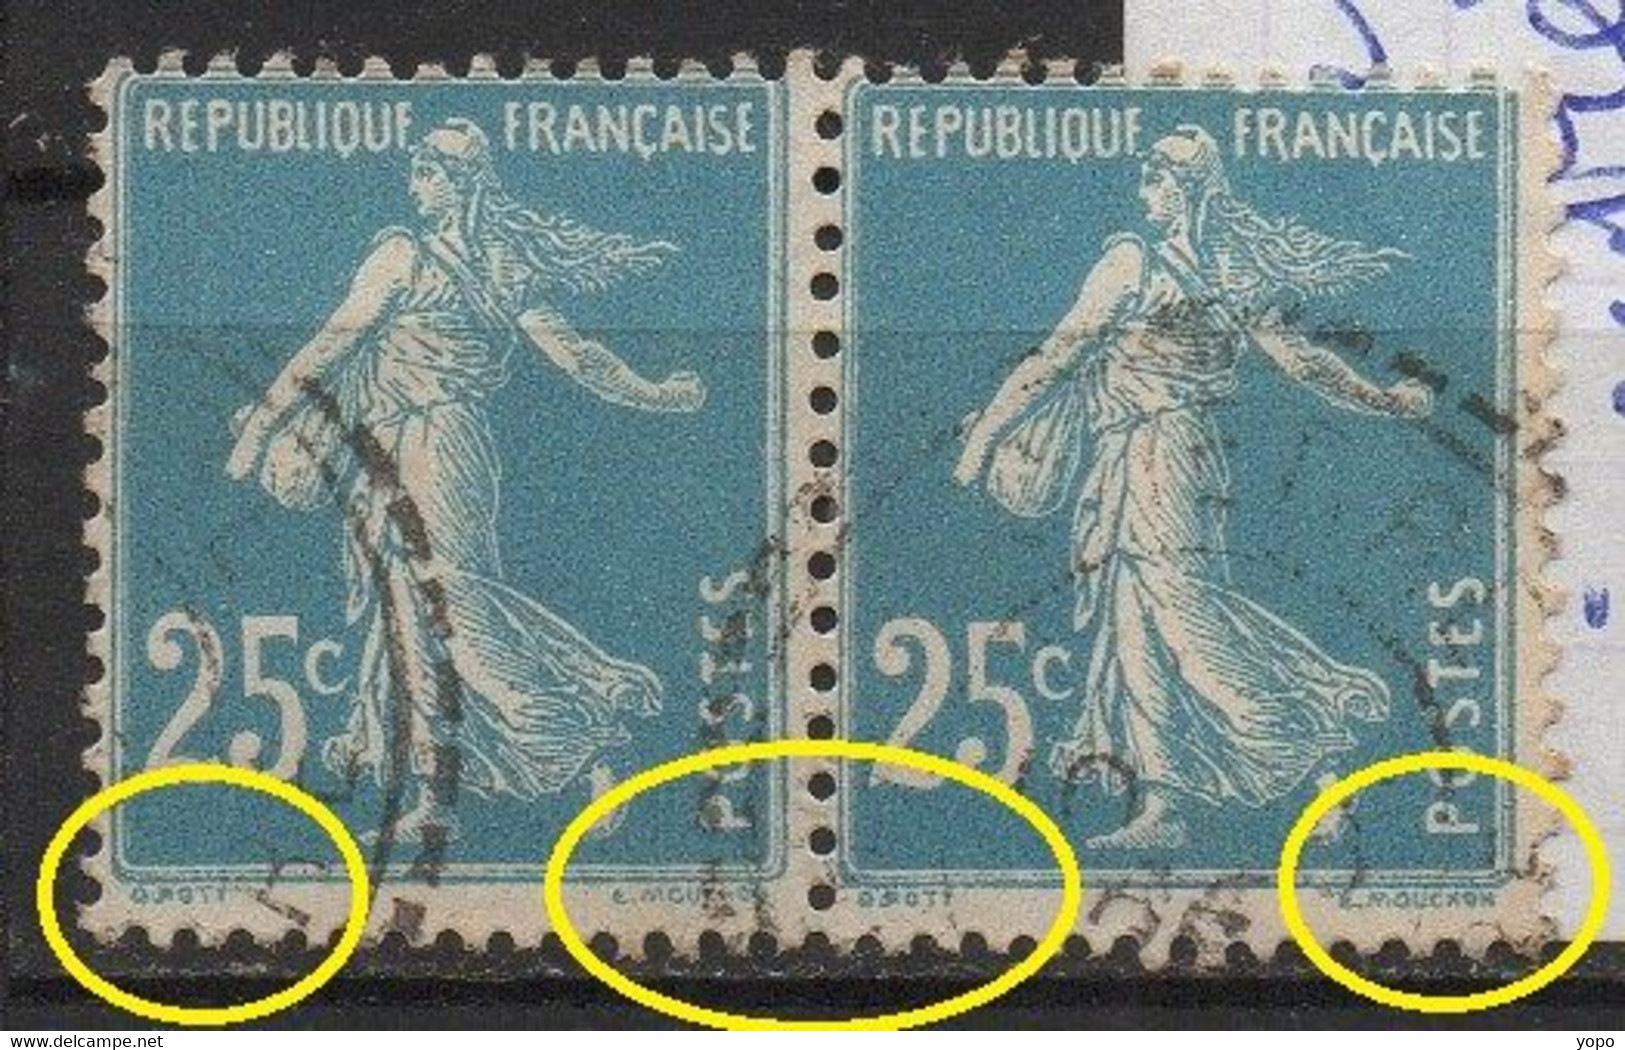 2 Timbres Type SEMEUSE CAMEE N° 140 Avec Défaut De Centrage - Used Stamps